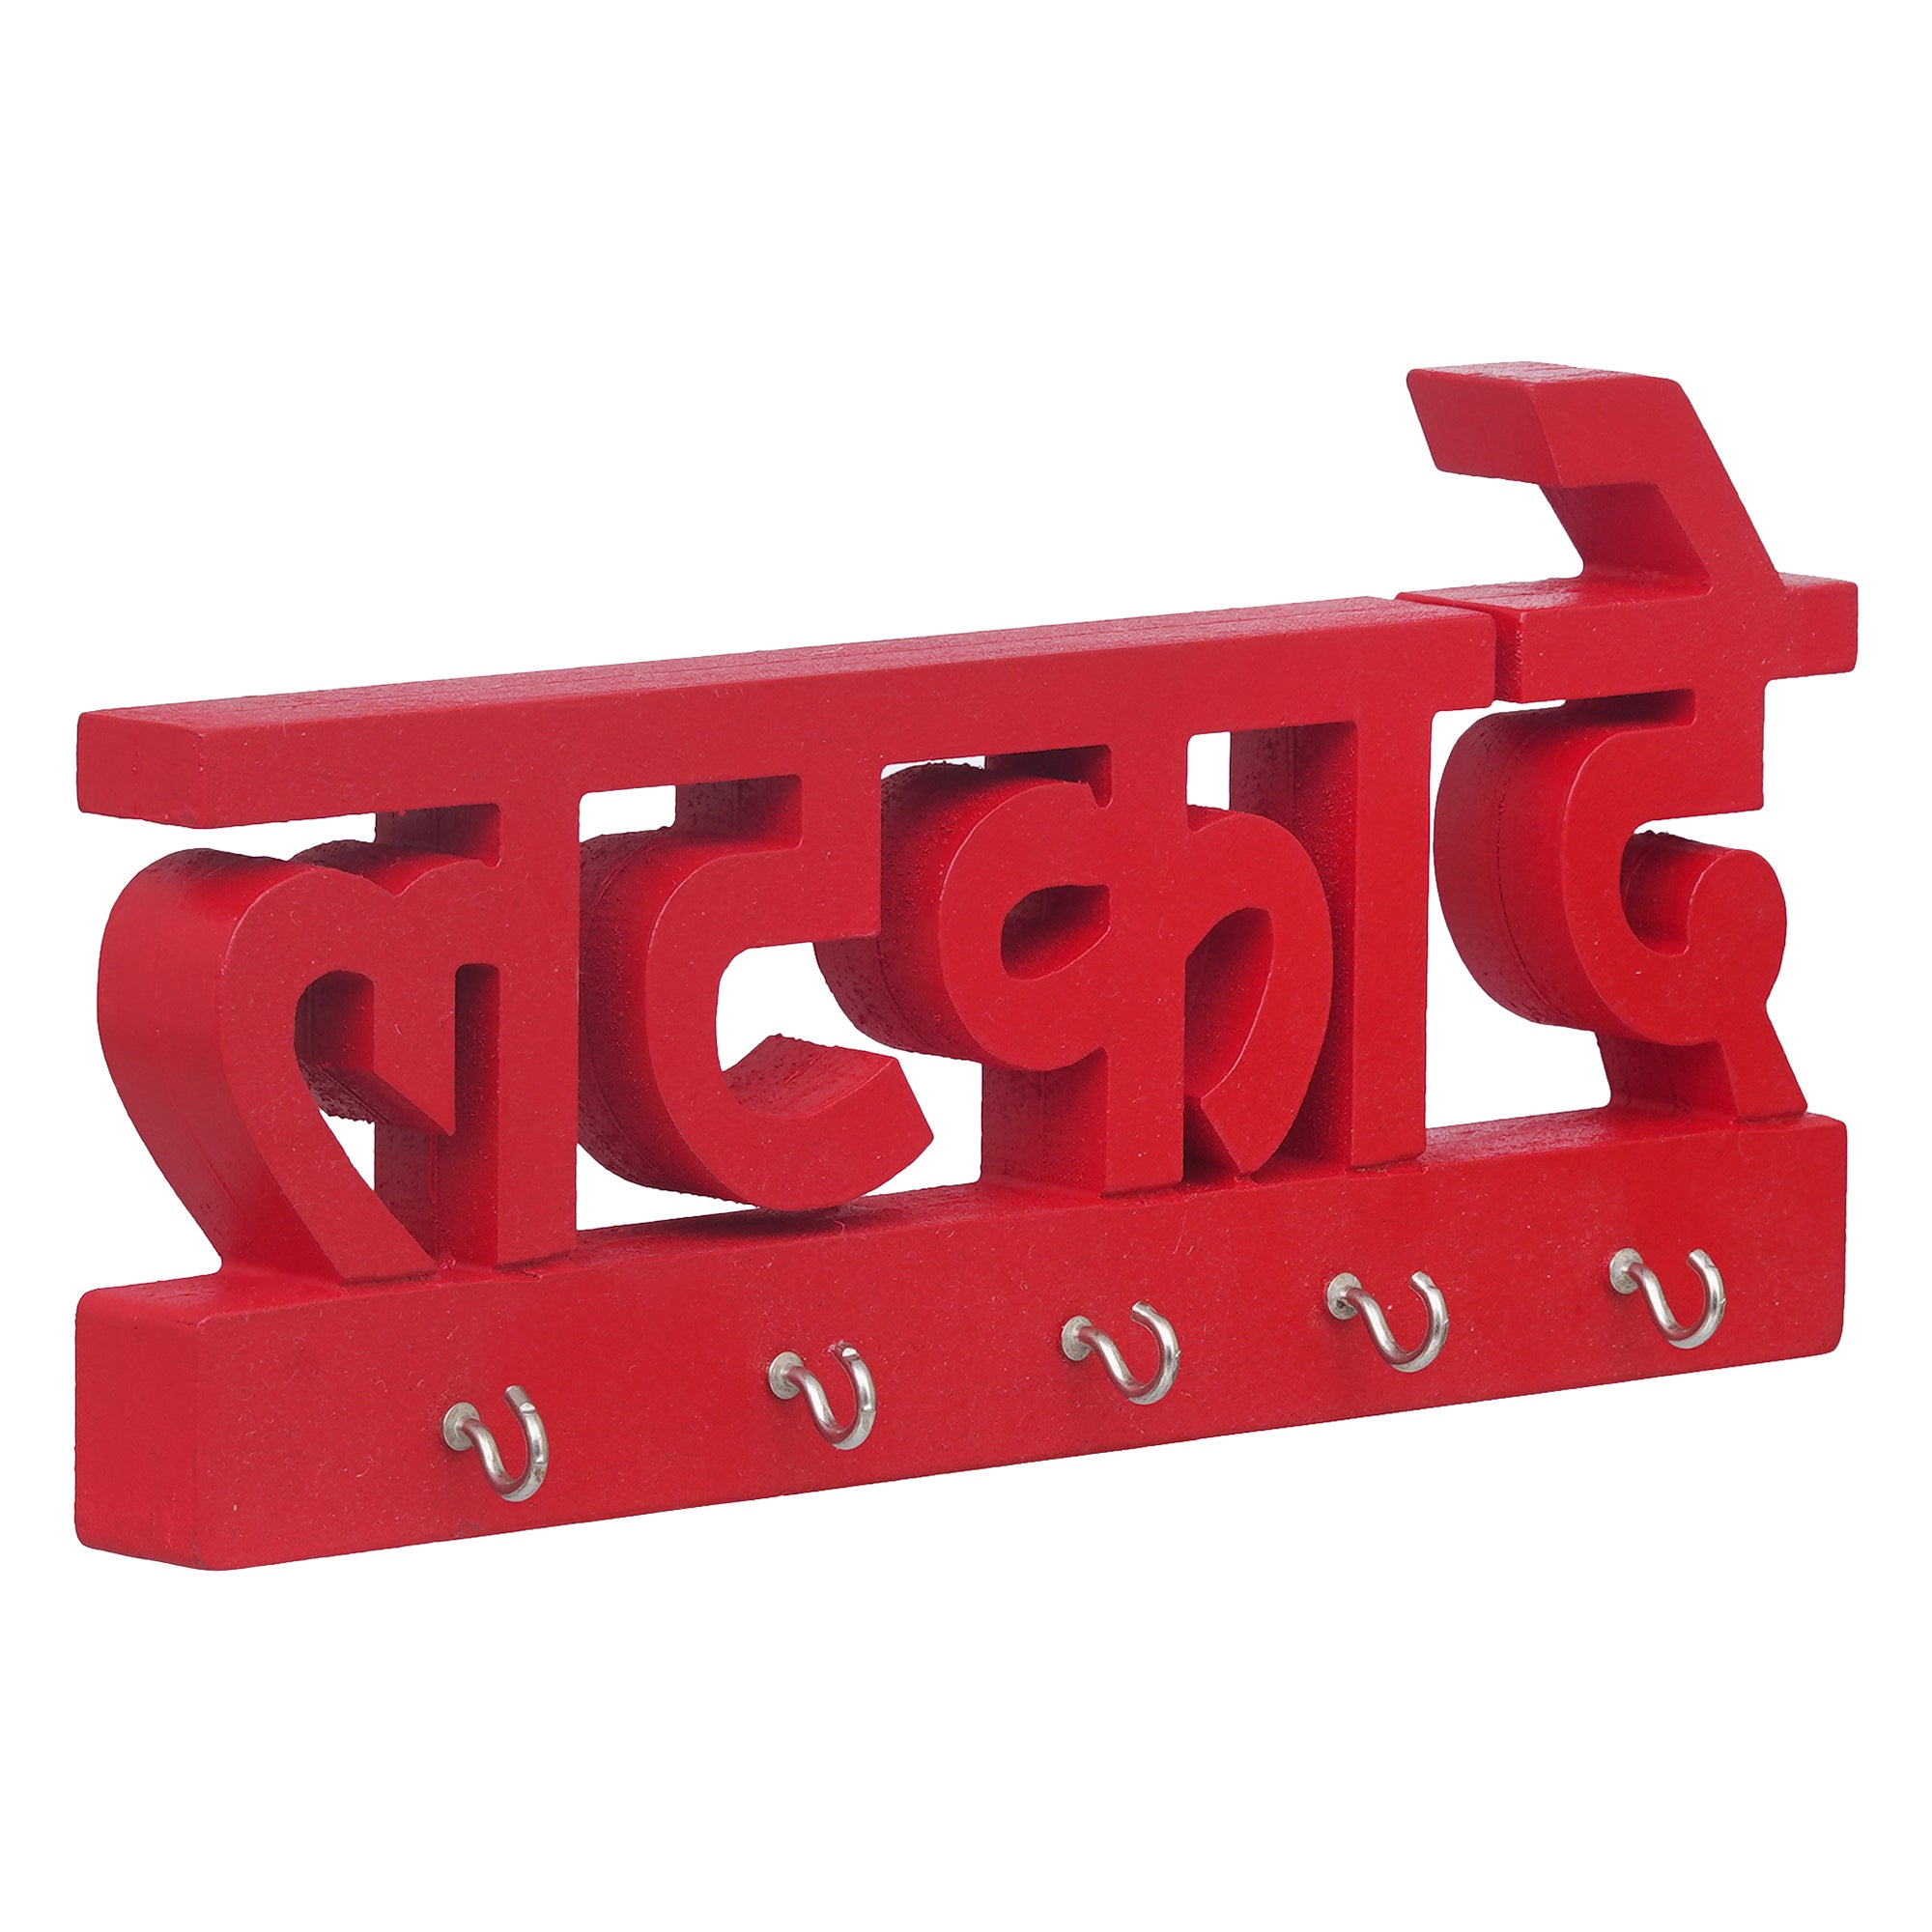 eCraftIndia Red "Latka De" Decorative Wooden Cutout Key Holder with 3 Key Hooks For Wall 6